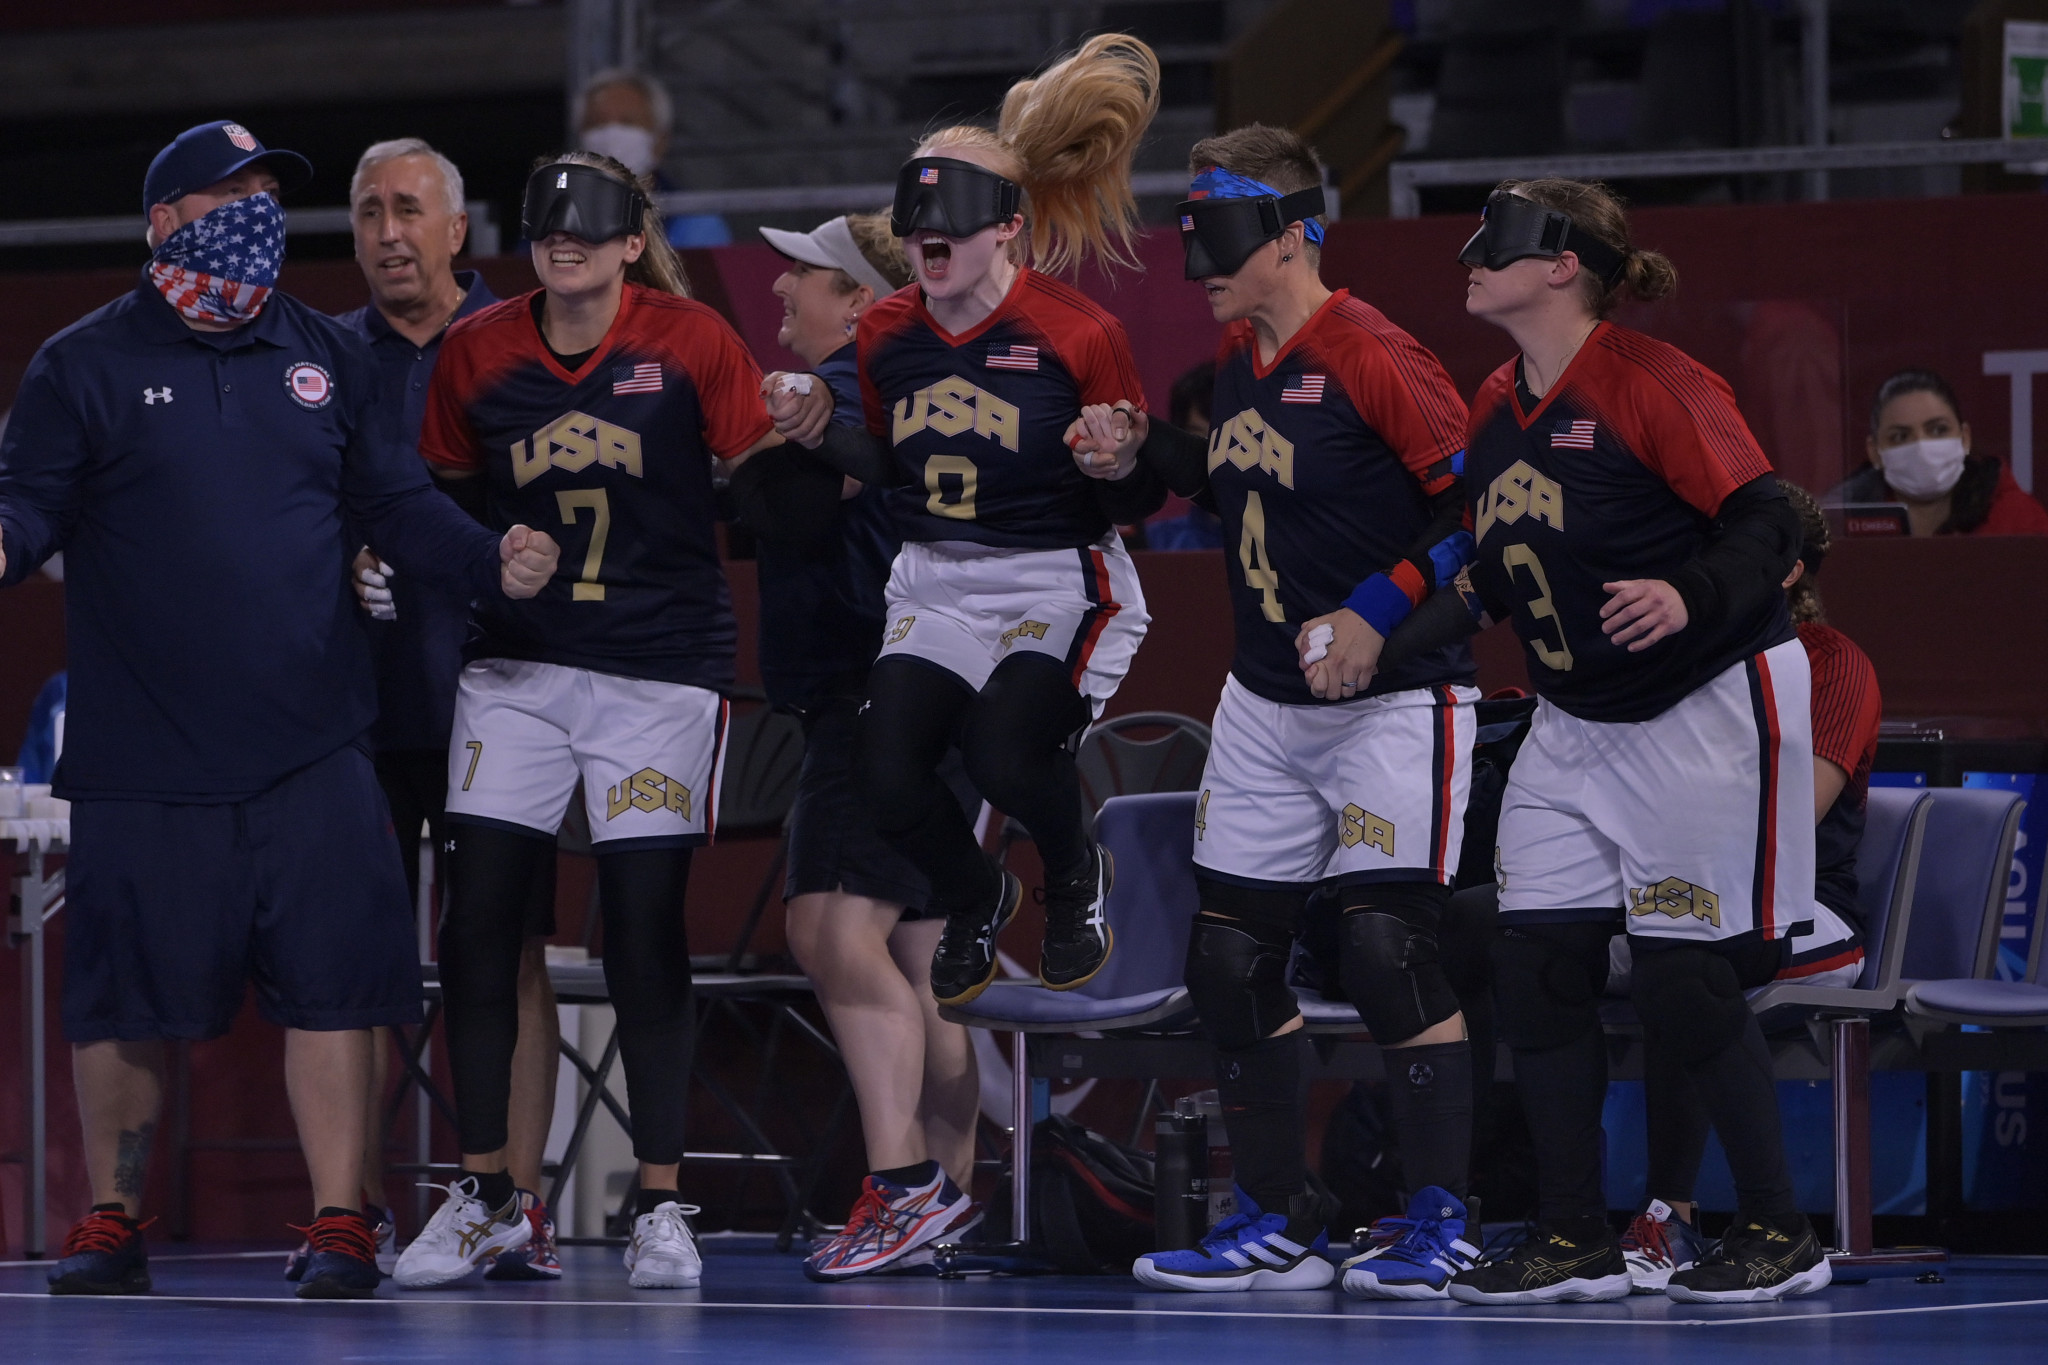 USABA pays tribute to United States goalball coach Gunderman after death aged 78